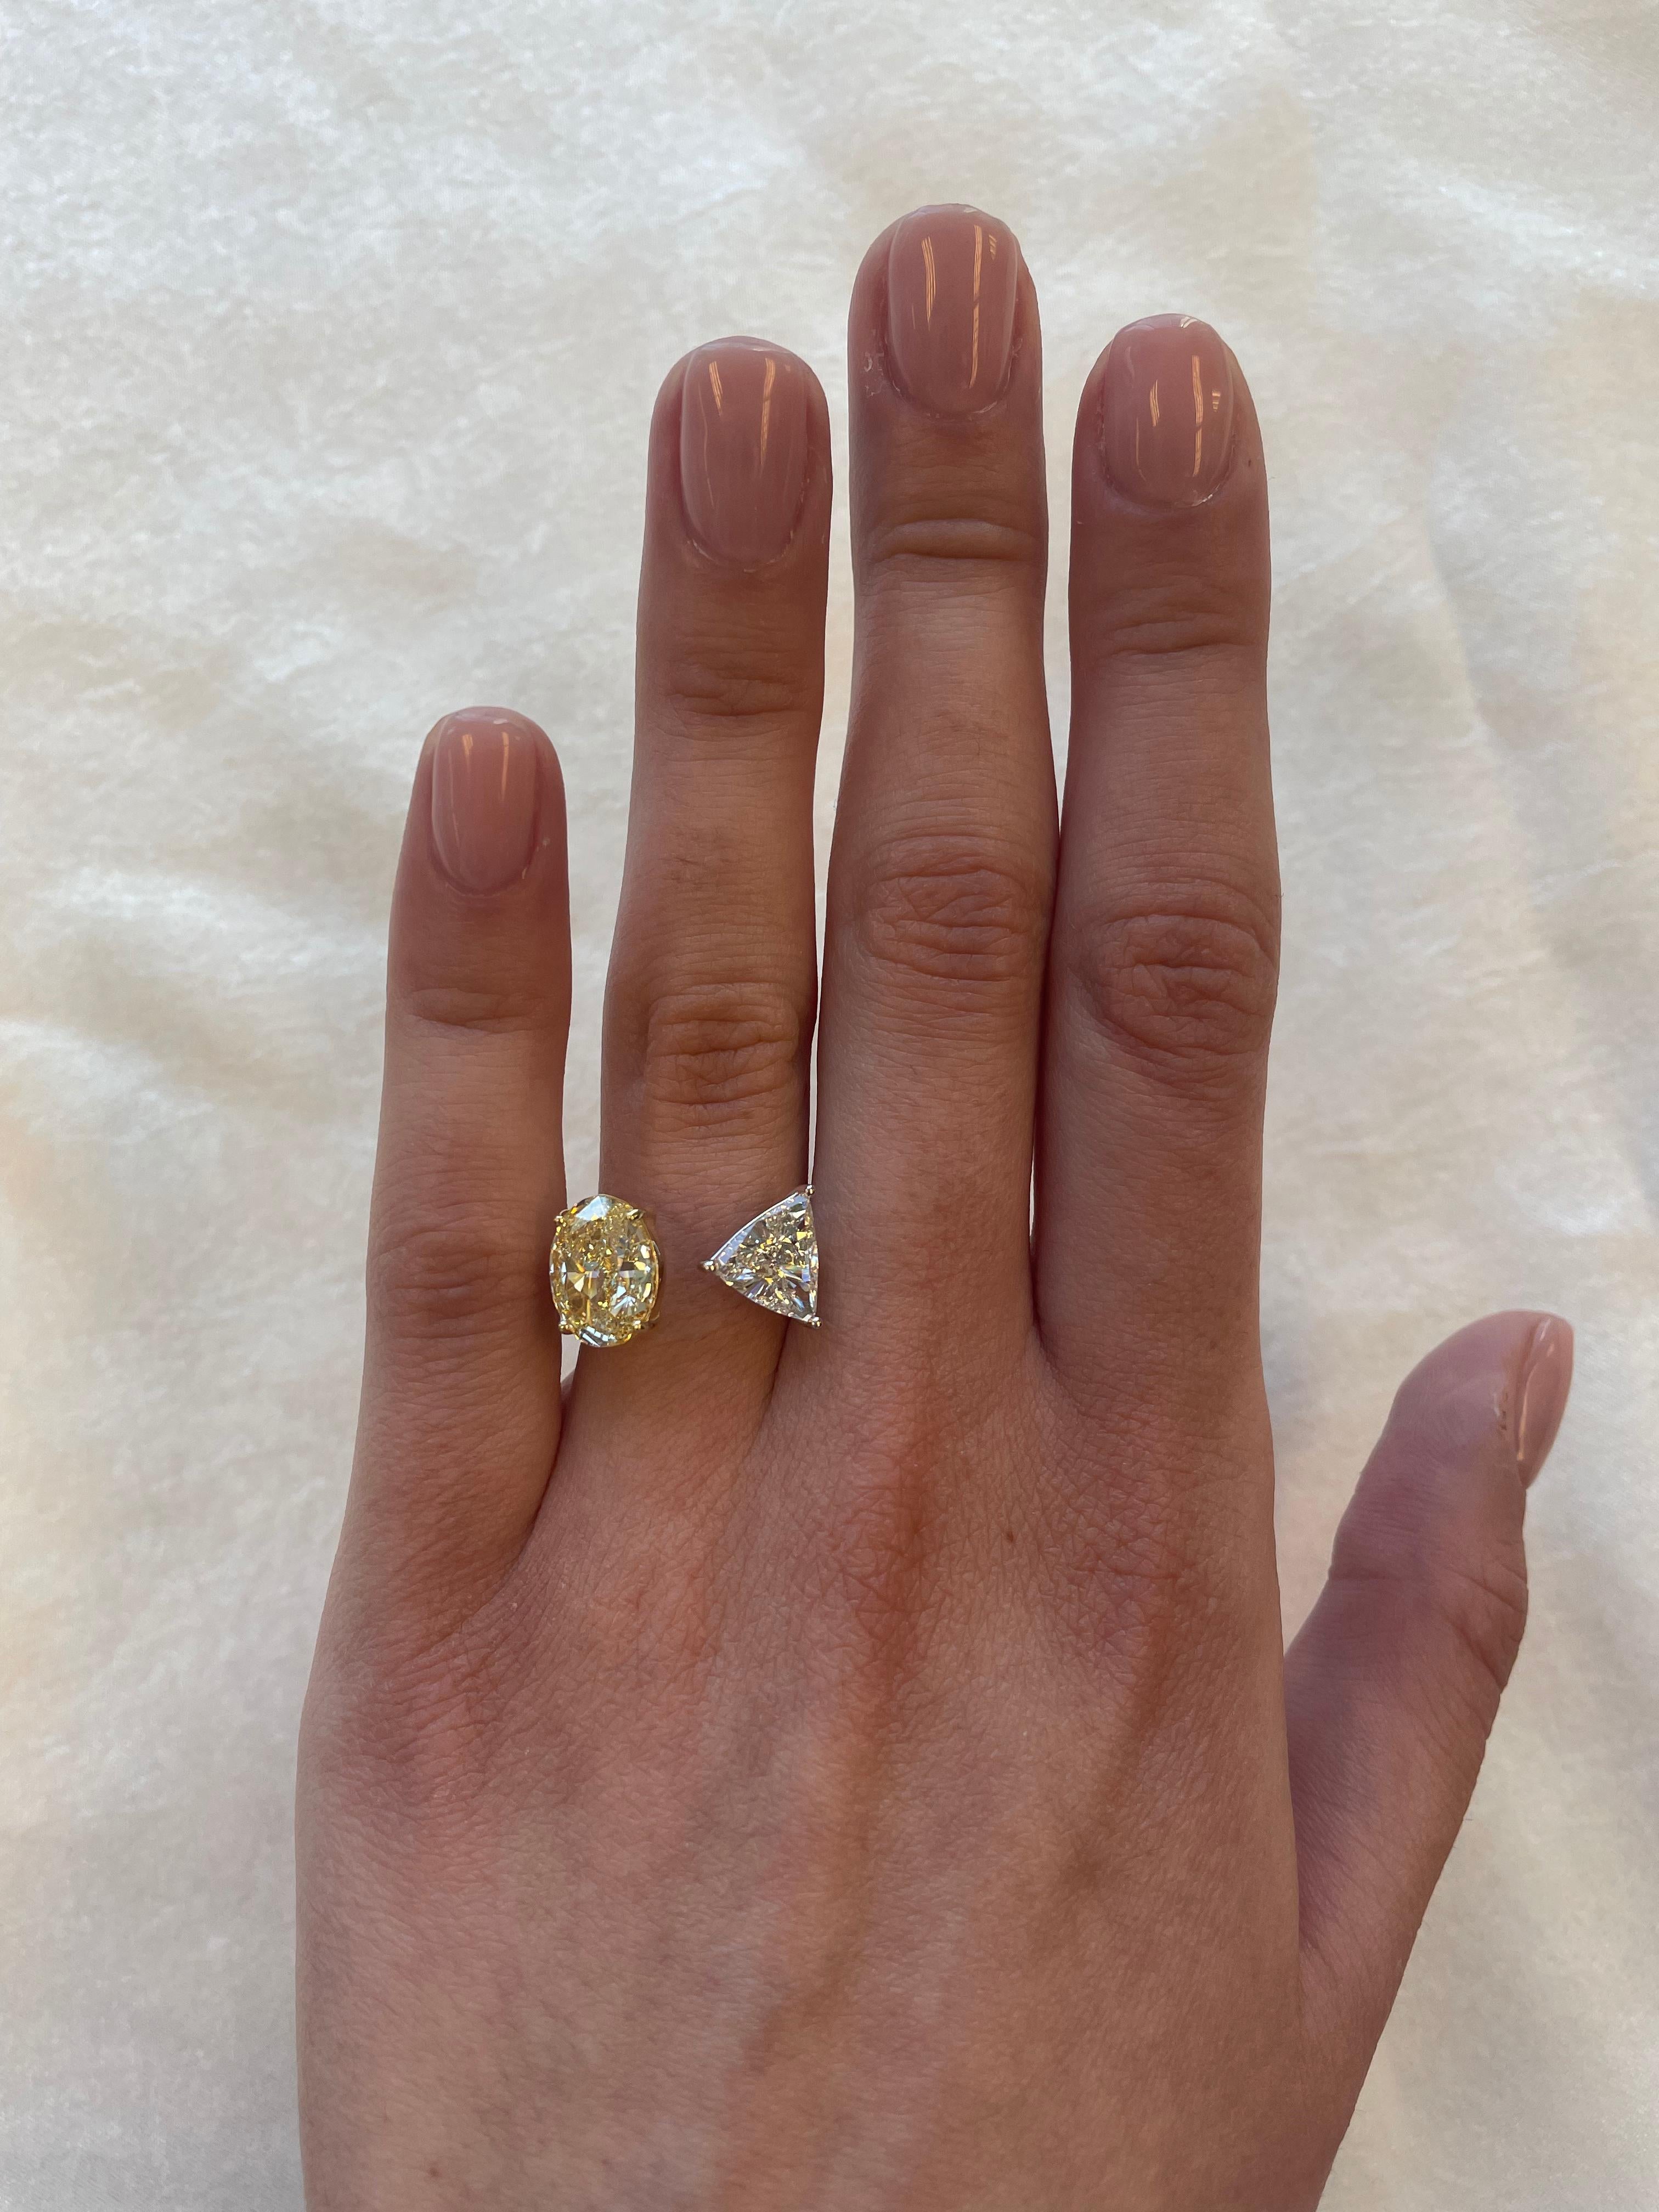 Stunning modern floating white & YZ yellow diamond open shank toi et moi ring, both stones GIA certified. High jewelry Alexander Beverly Hills.
5.11 carats total diamond weight.
3.55 carat oval diamond, YZ color grade and VVS2 clarity grade, GIA